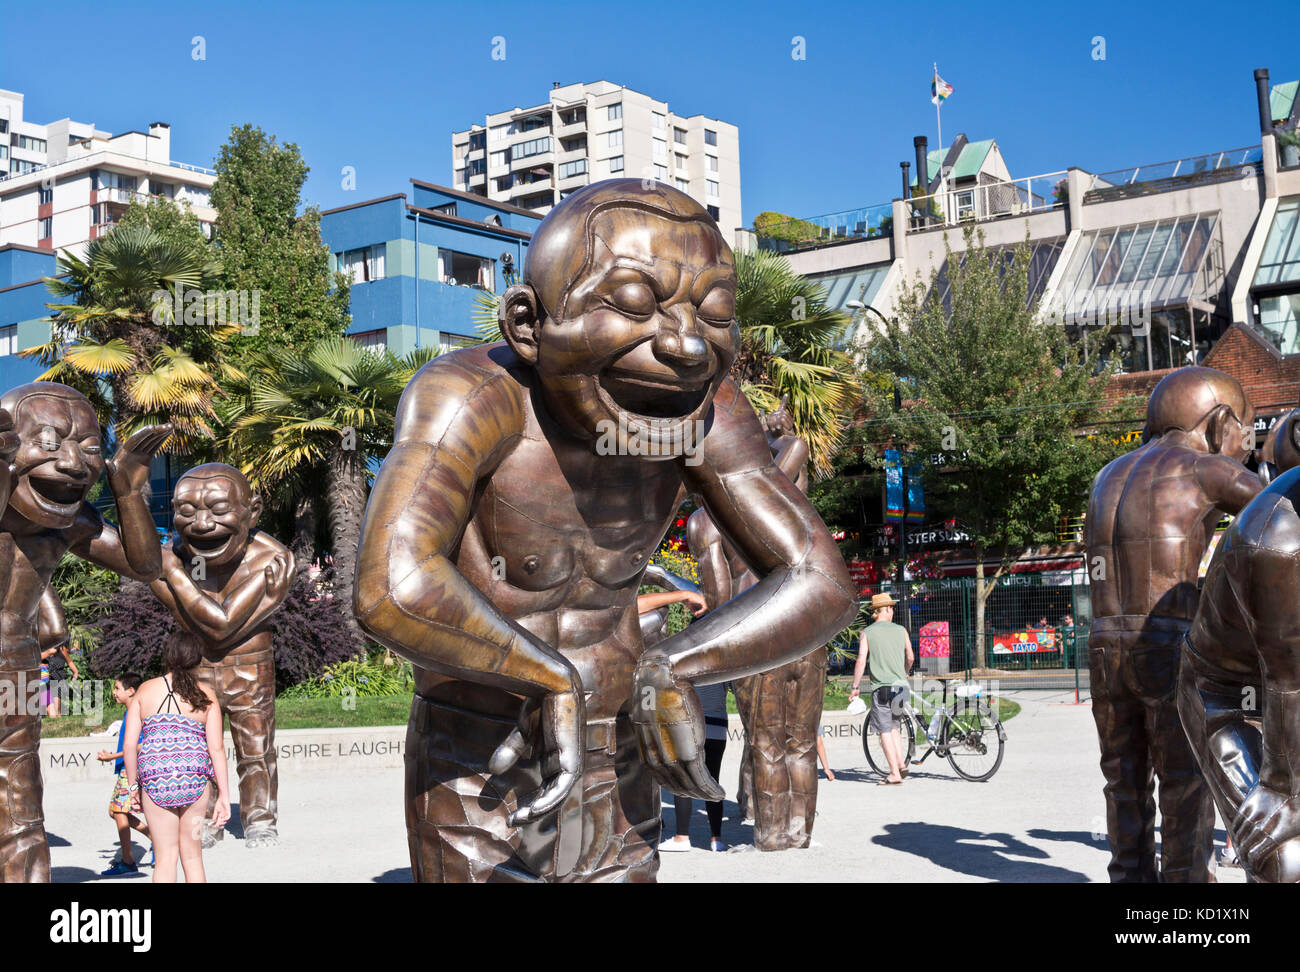 Laughing men statues, (A-maze-ing Laughter) by Yue Minjun at Morton Park near English Bay in Vancouver, BC, Canada. Stock Photo